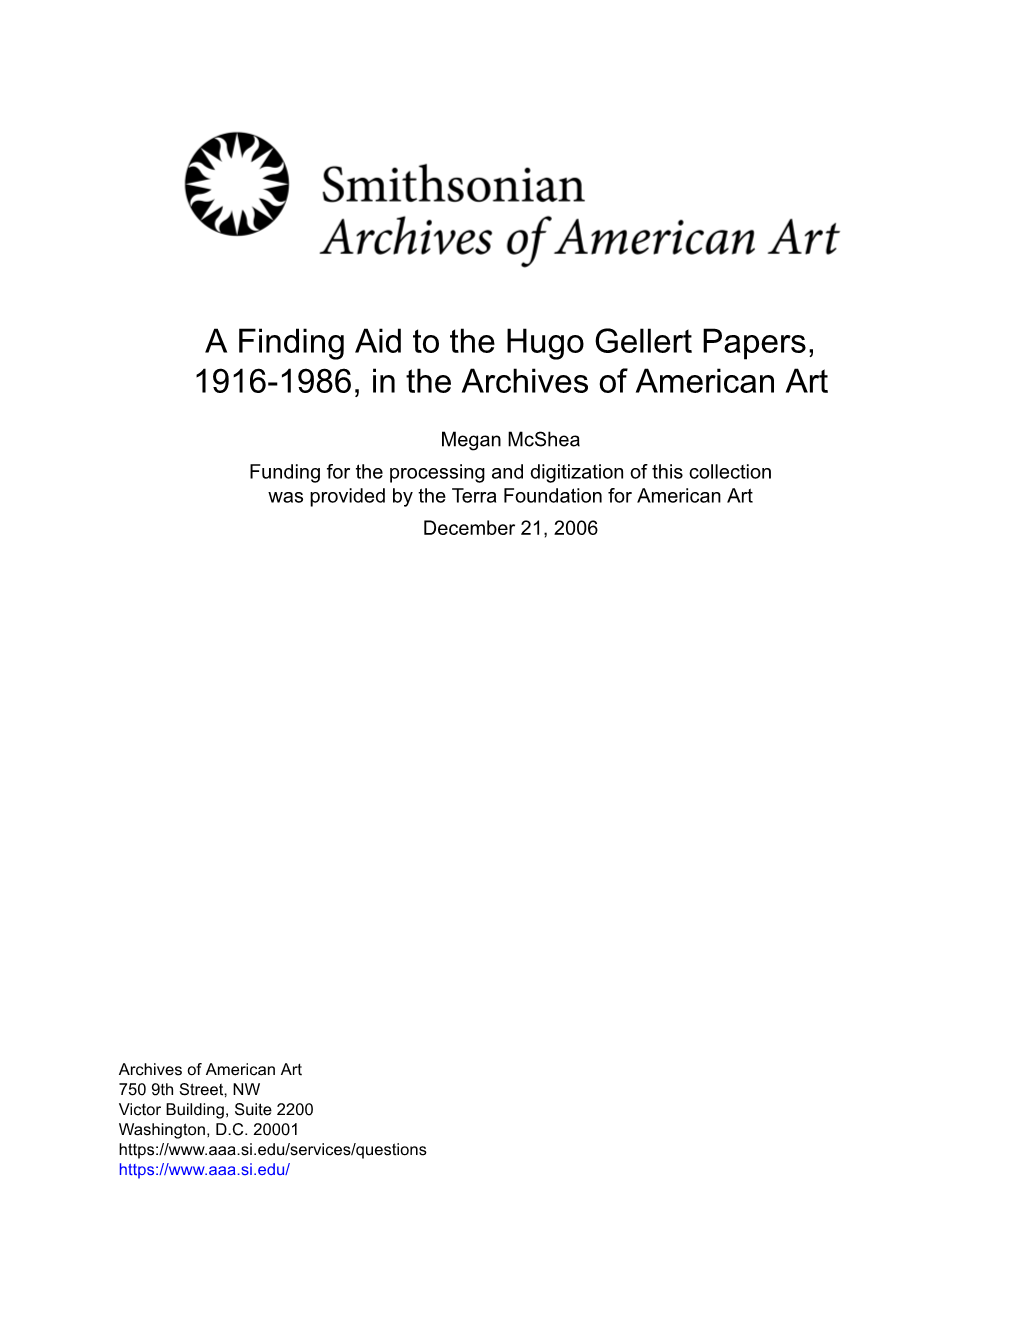 A Finding Aid to the Hugo Gellert Papers, 1916-1986, in the Archives of American Art